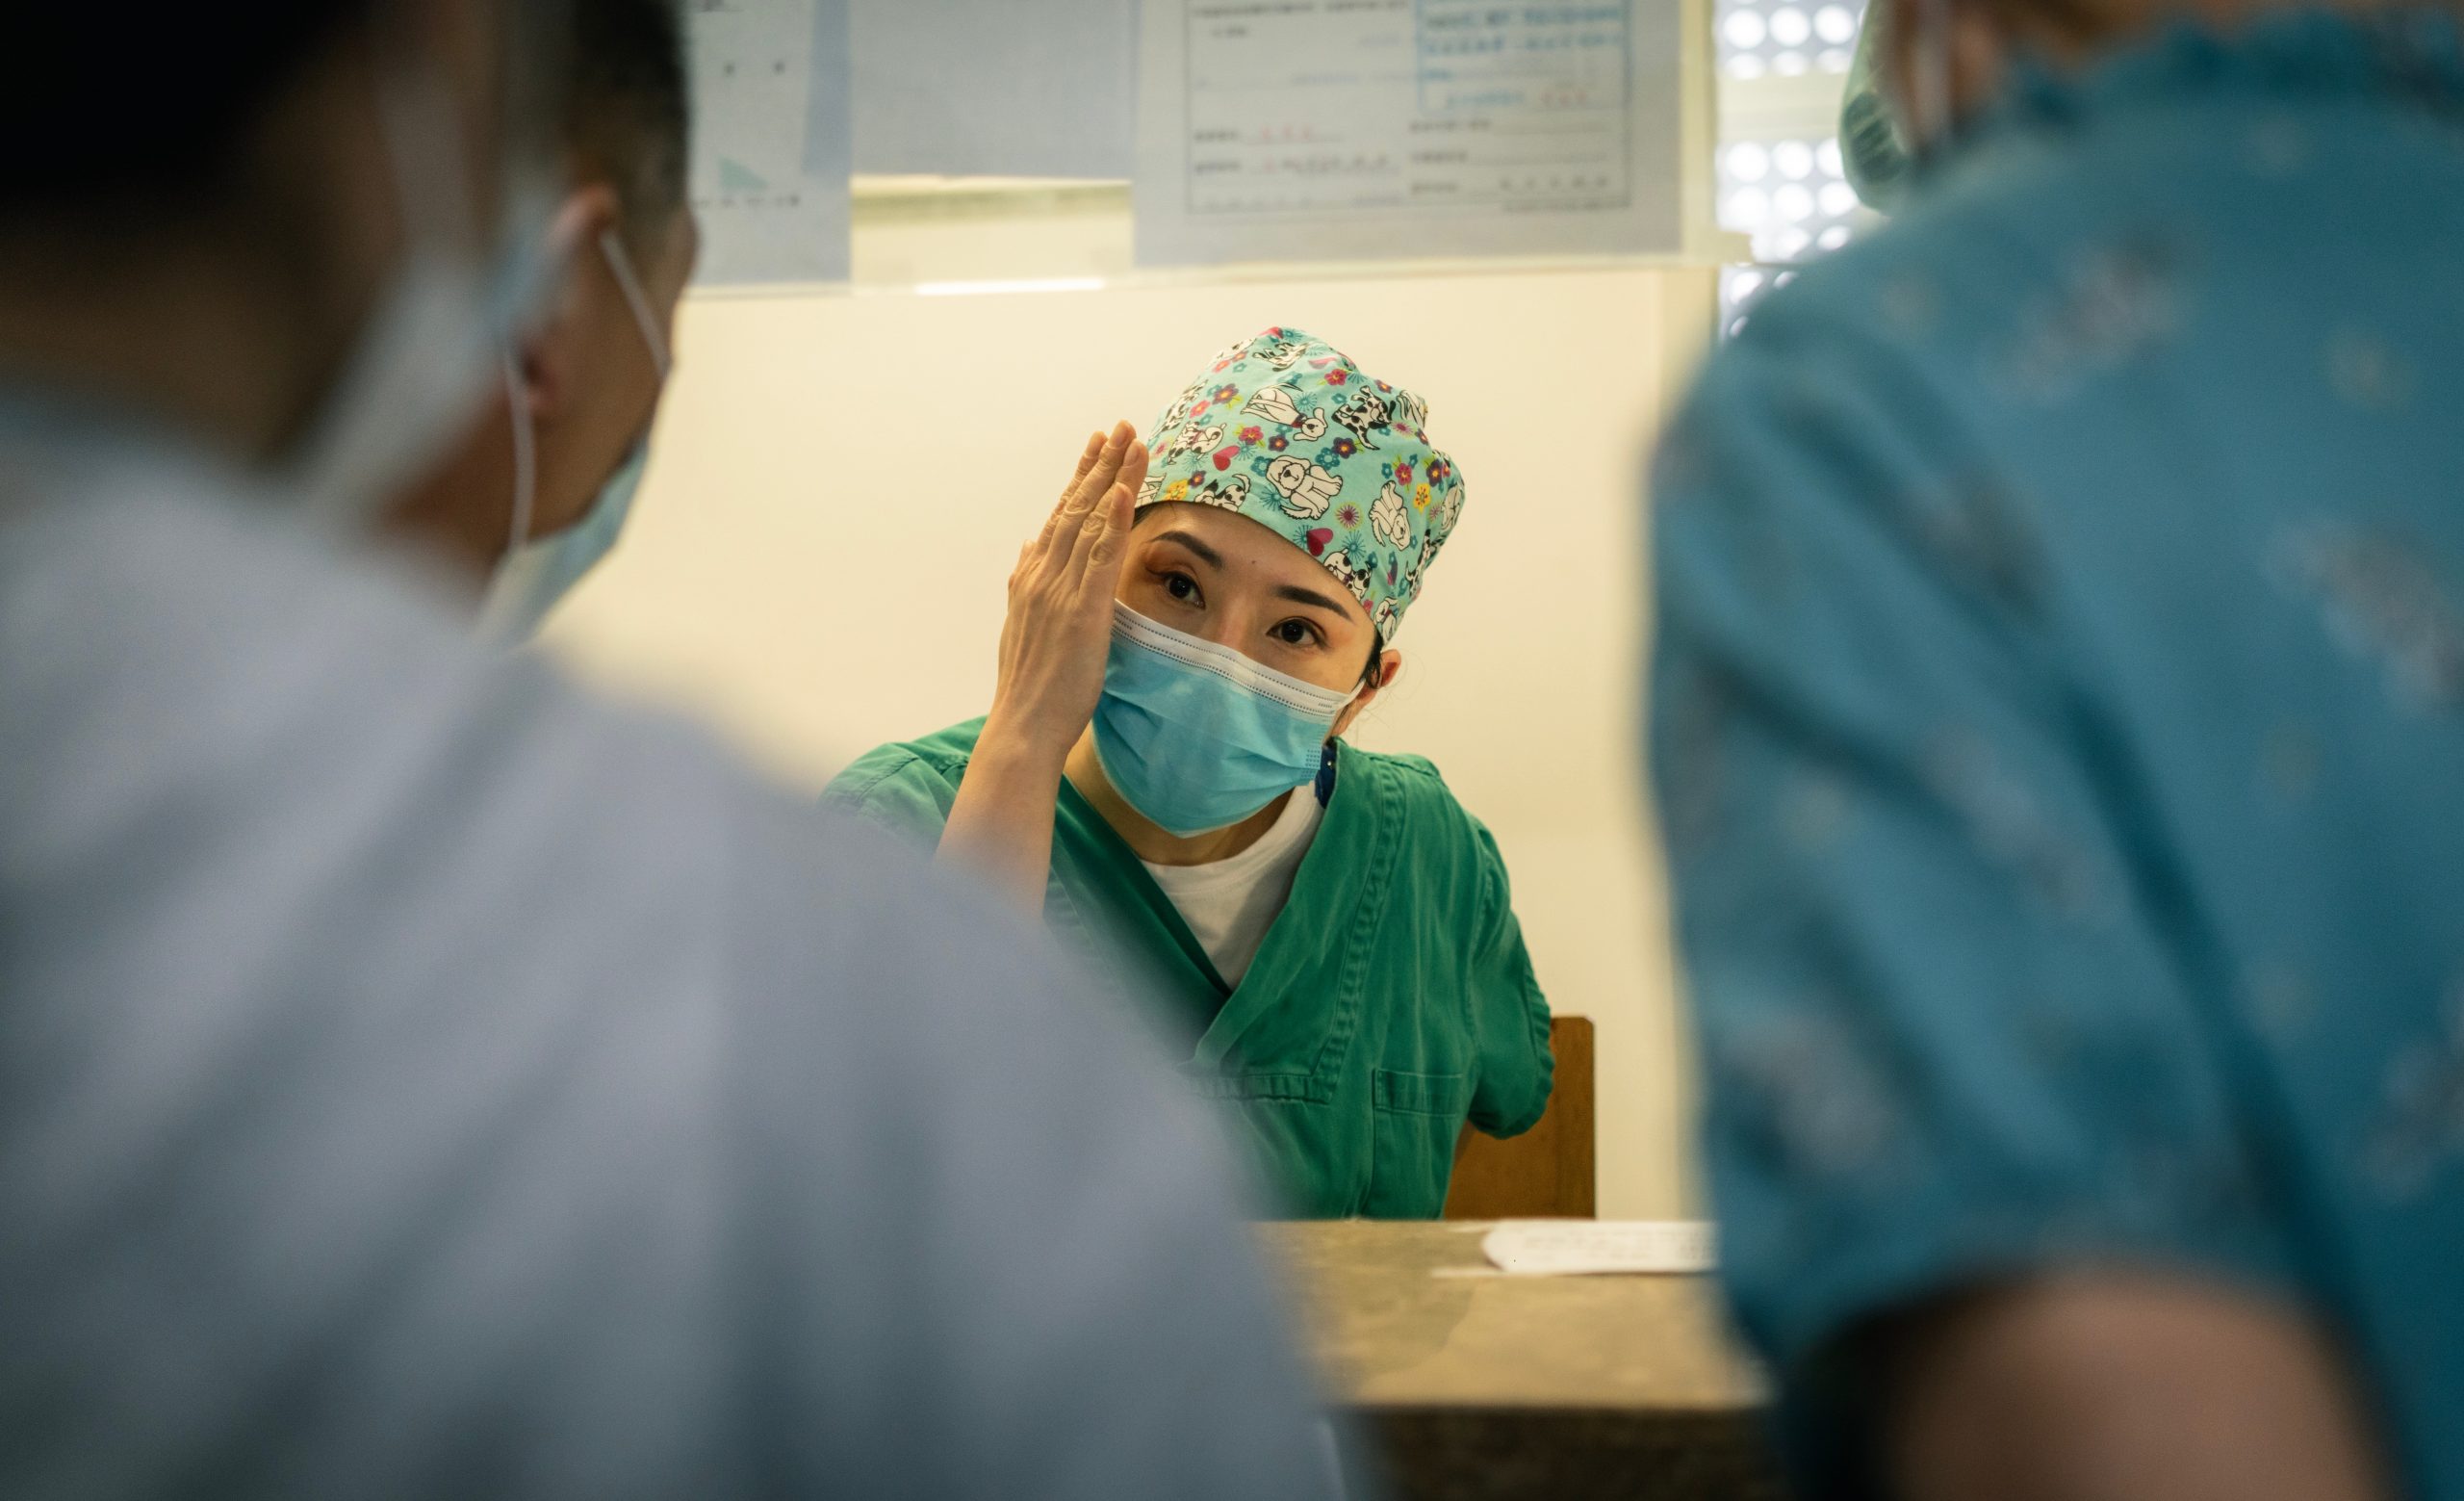 Nearly 2 million NATs conducted last year; Macao with fewer doctors but more nurses